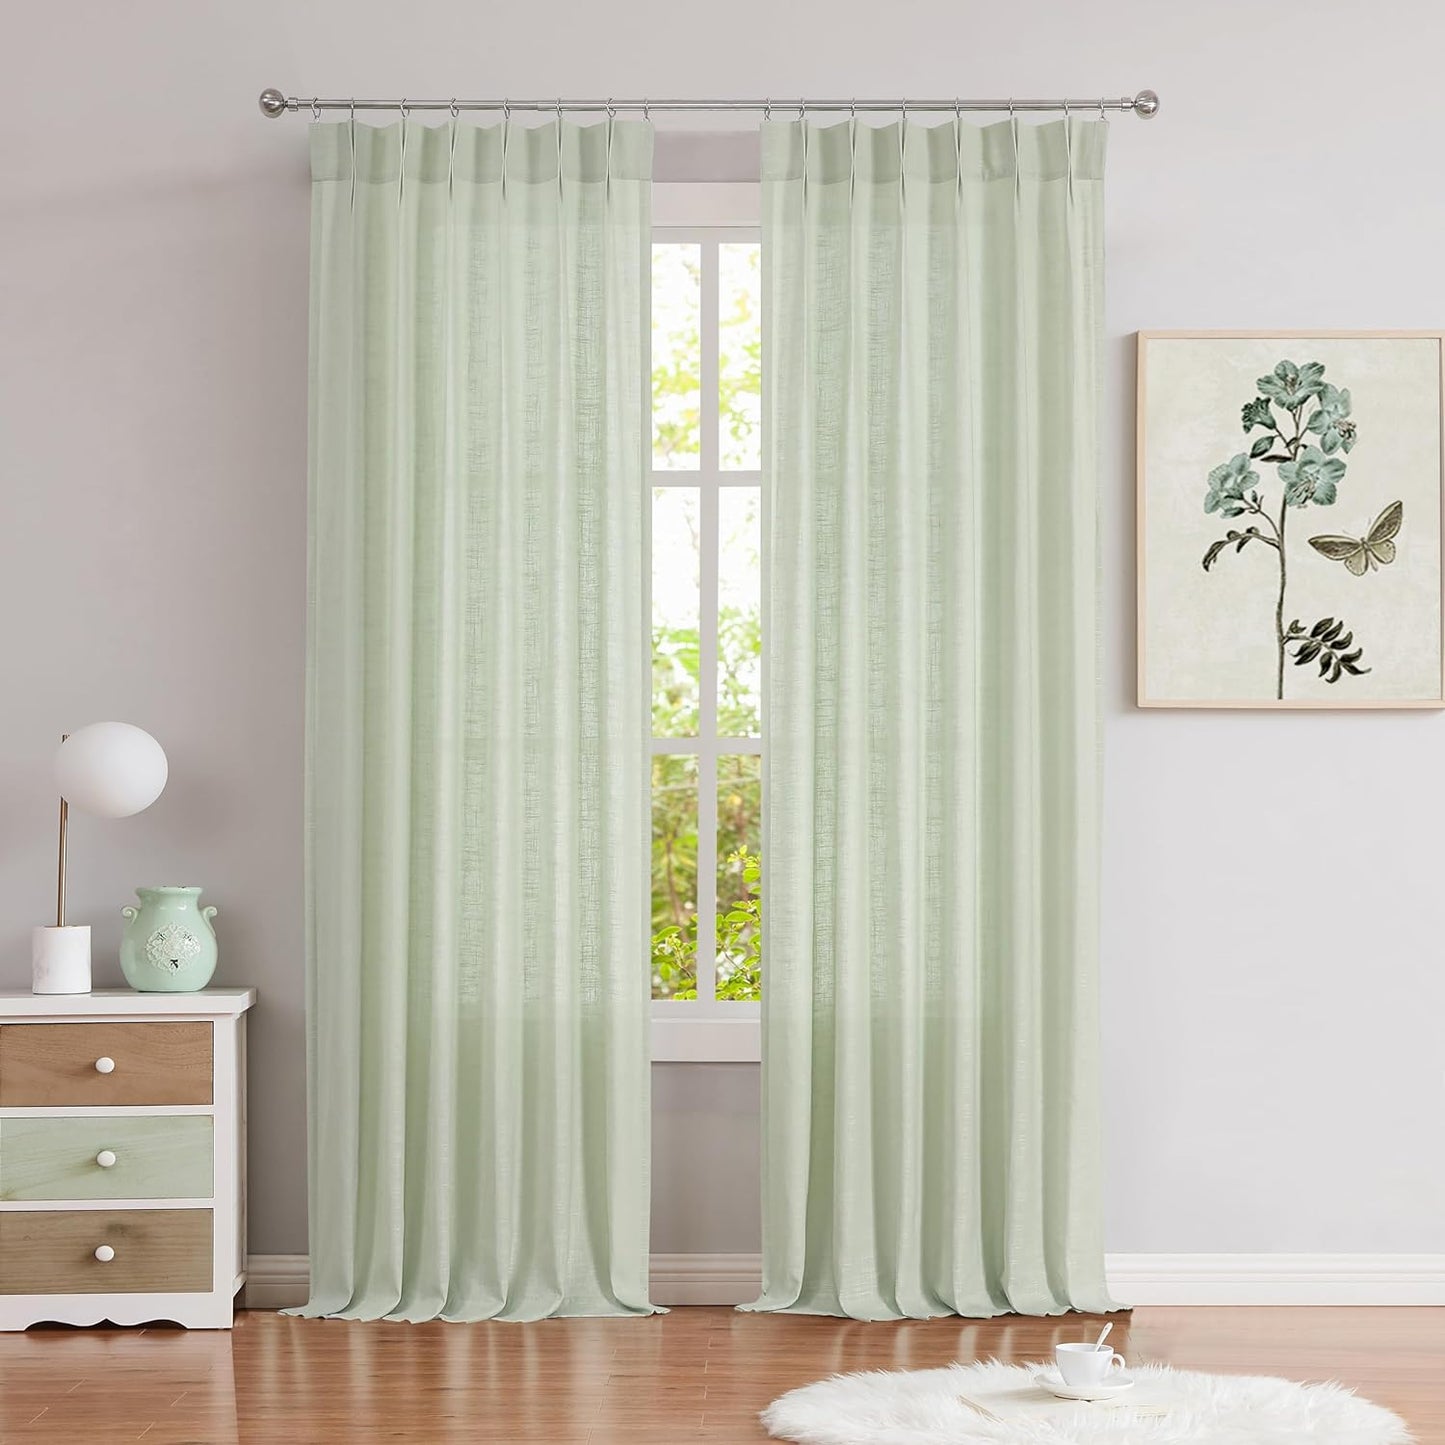 White Pinch Pleated Curtain Semi Sheer Curtain Panel Linen Cotton Blend Decorative Drape 84 Inches Long for Living Room Bedroom Farmhouse Rustic Window Treatment, White, 34"X84"X2  Central Park Light Green 34"X95"X2 